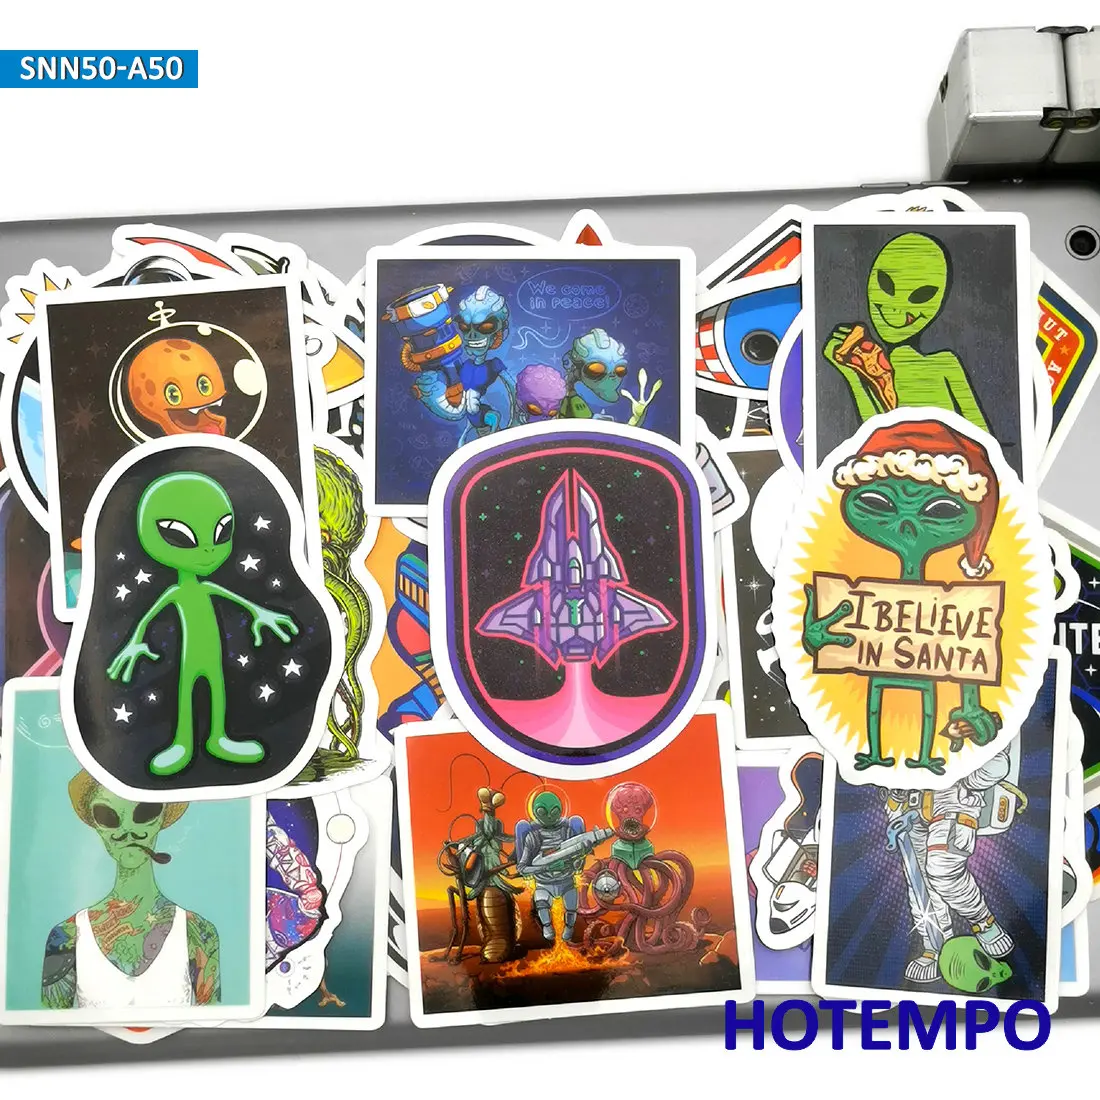 

50pcs Outer Space Alien UFO Rocket Astronaut Universe Style Stickers for DIY Phone Laptop Luggage Skateboard Car Decals Stickers